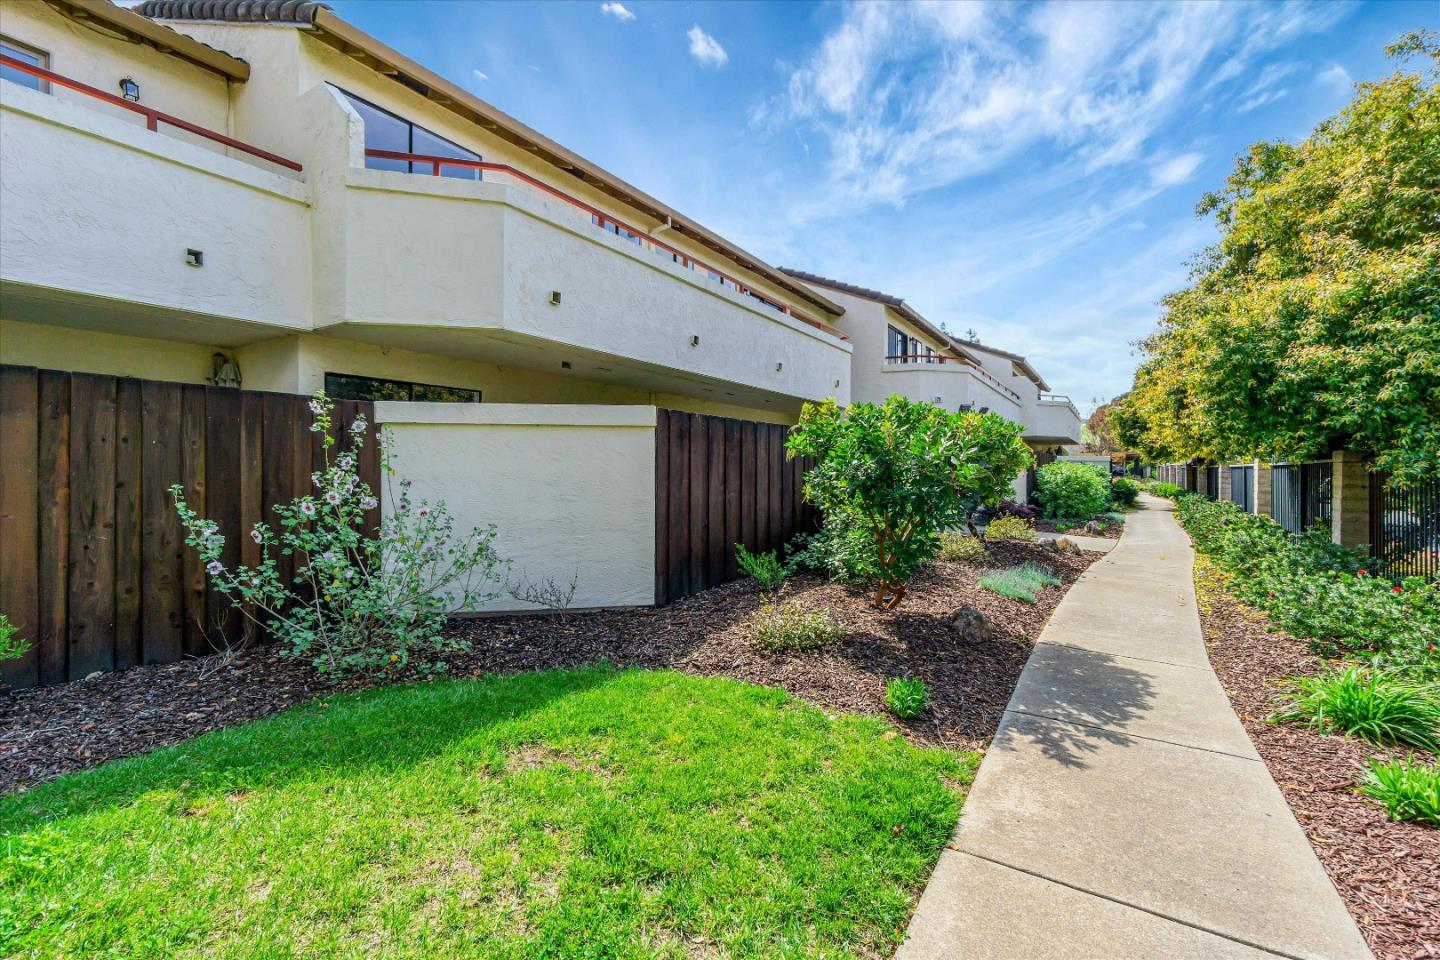 Photo of 5015 Valley Crest Dr #127 in Concord, CA